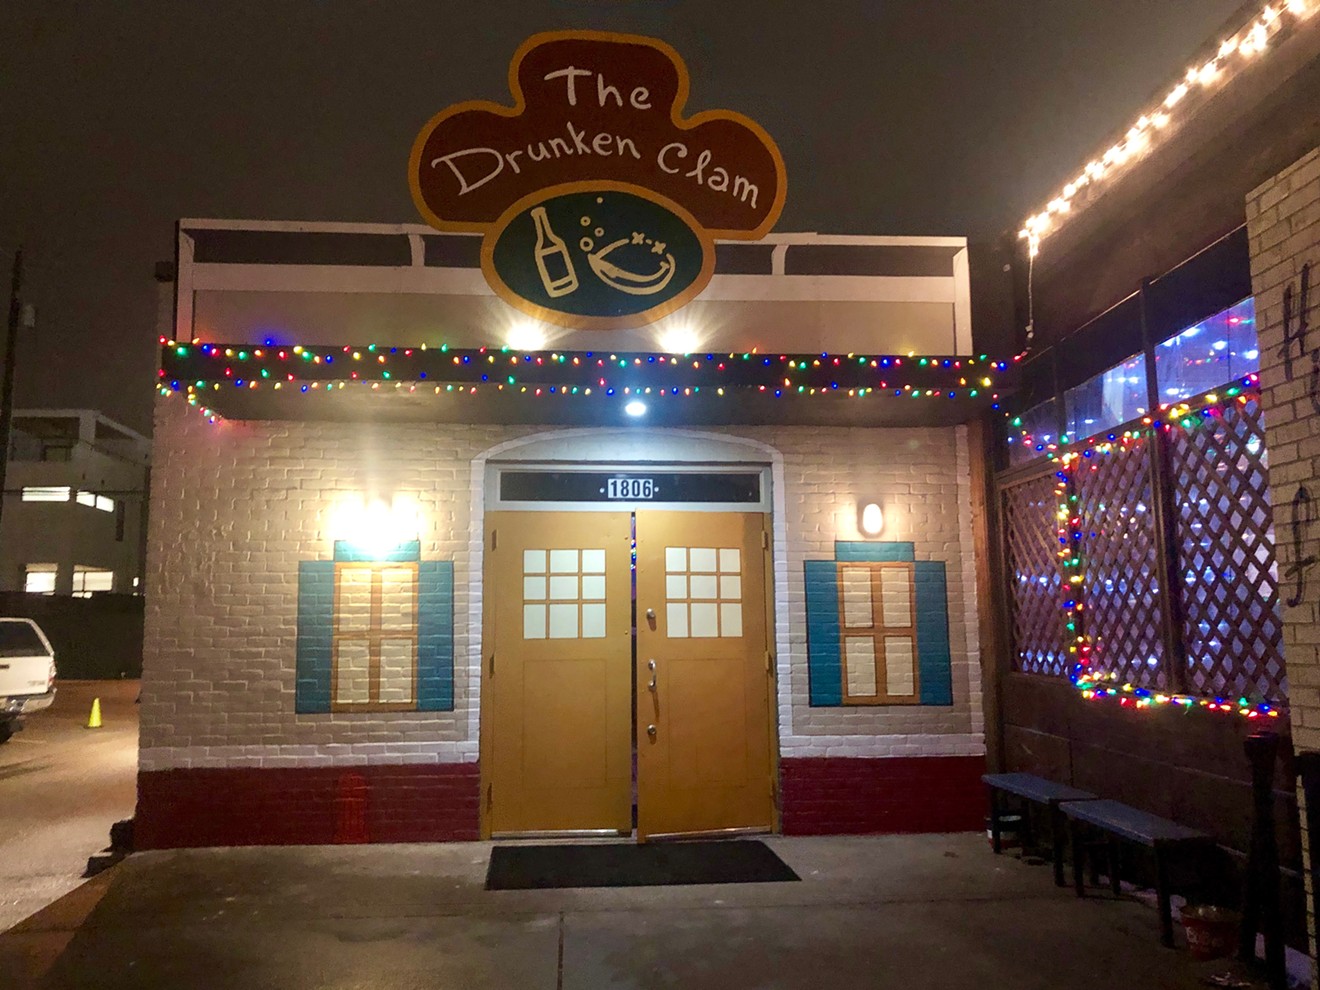 The Whippersnapper is dead, but something new (and temporary) has already popped up in its place: the Drunken Clam. Look familiar?